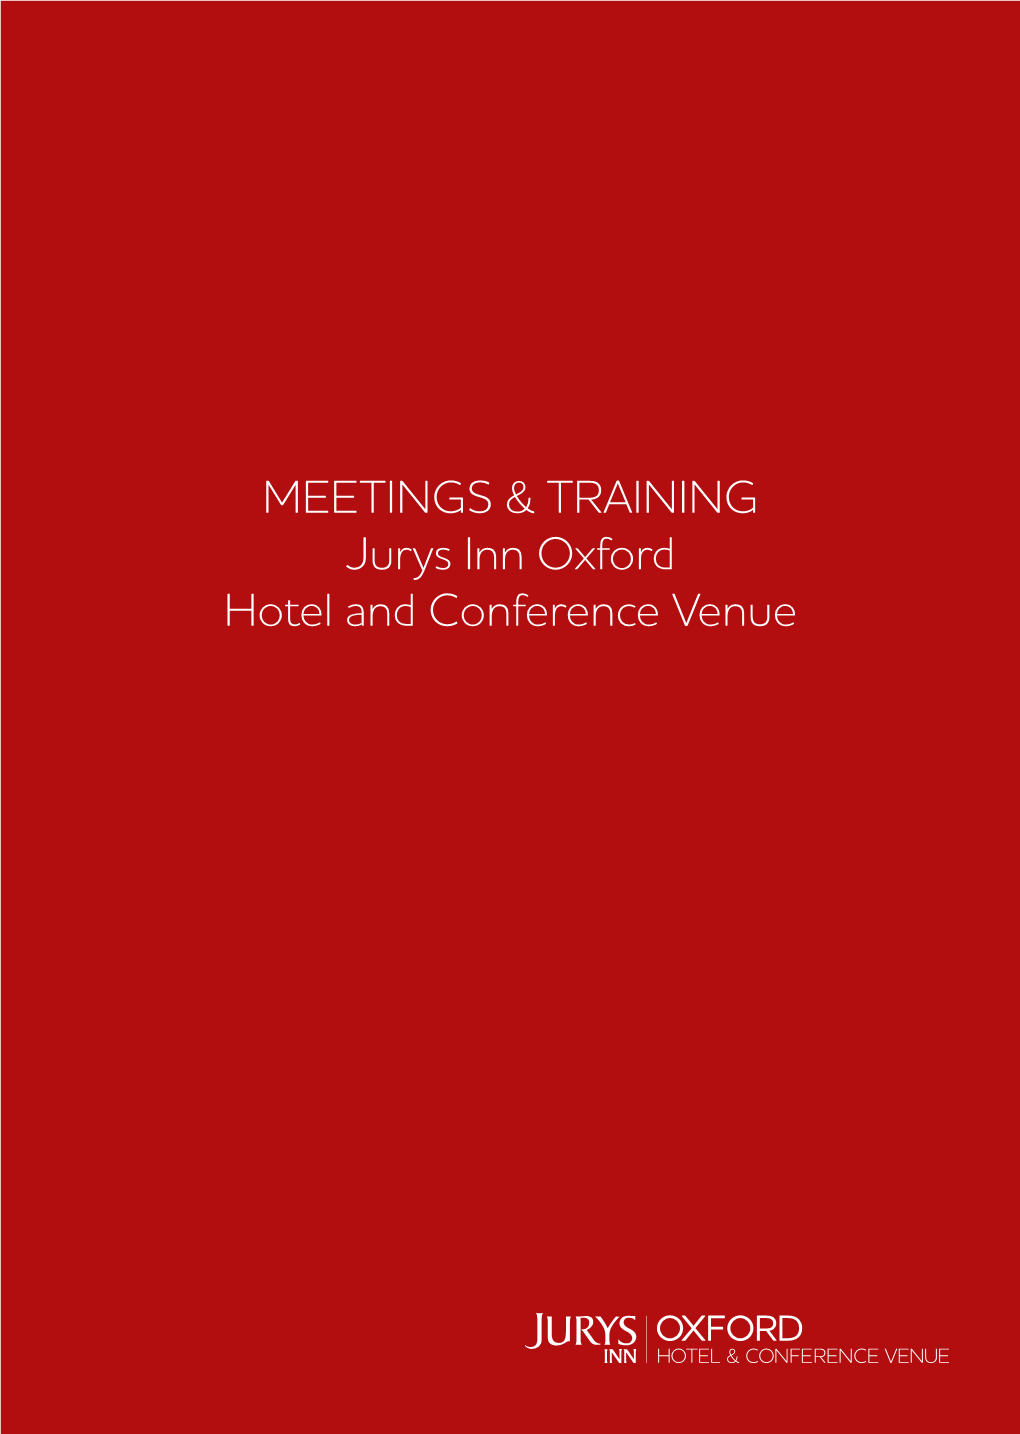 MEETINGS & TRAINING Jurys Inn Oxford Hotel and Conference Venue